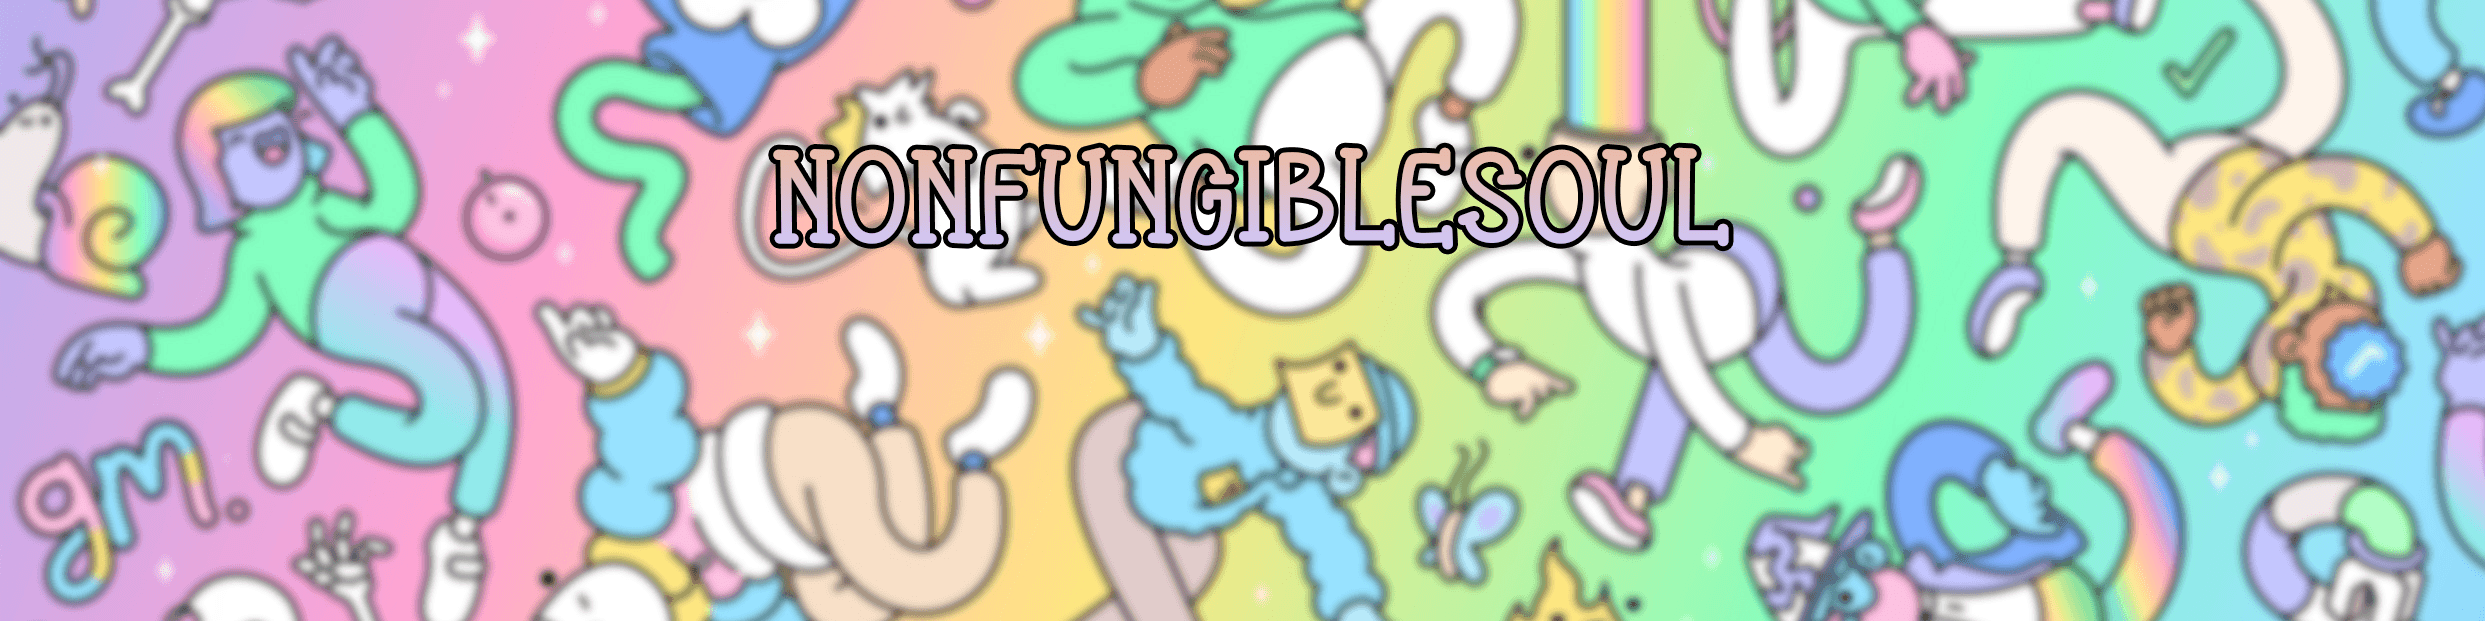 NonFungibleSoul 横幅